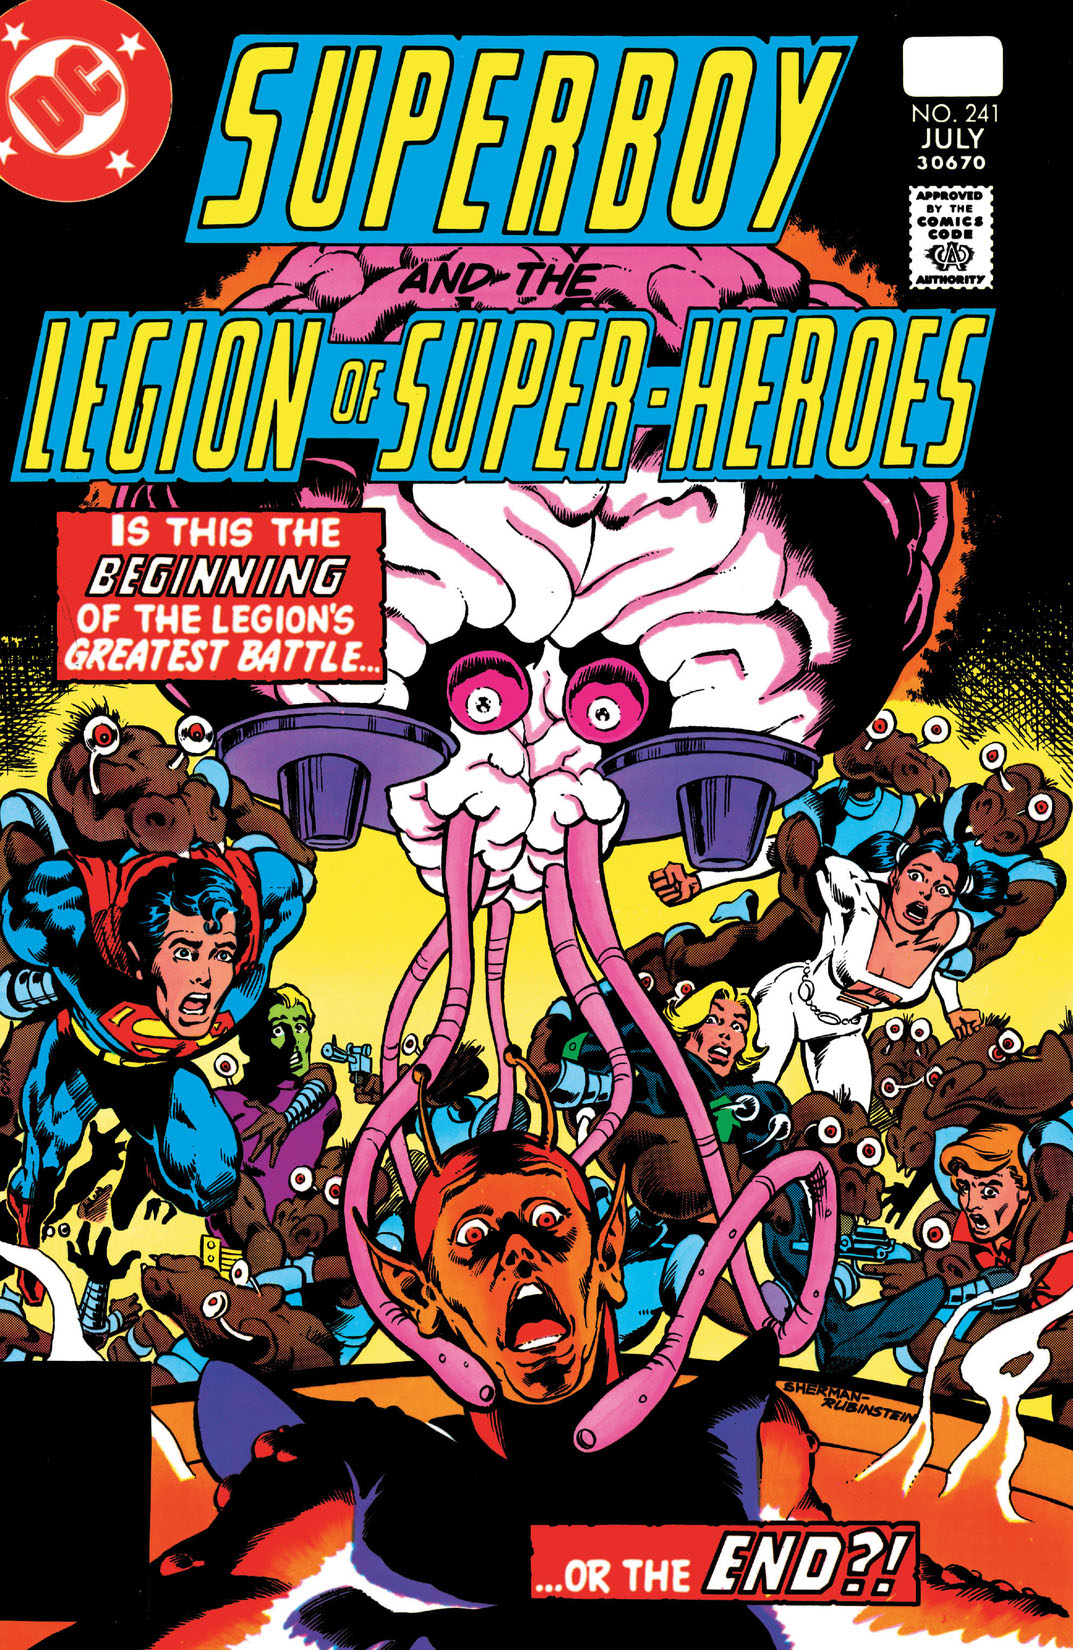 Superboy and the Legion of Super-Heroes (1977-) #241 preview images